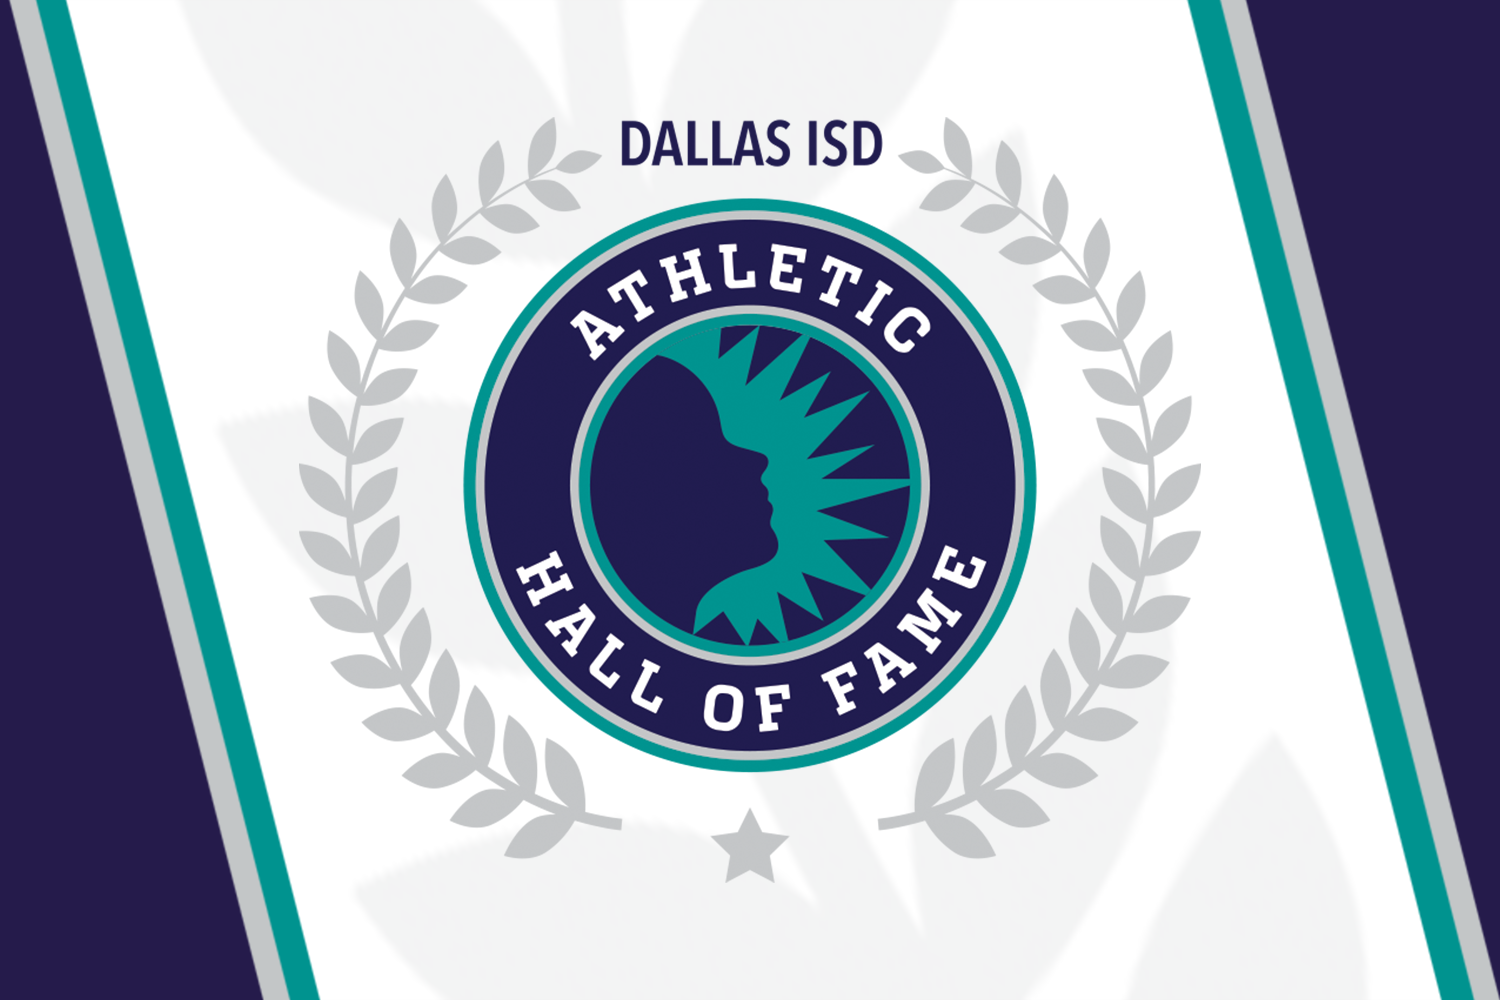  Dallas ISD to Induct Seven into Athletic Hall of Fame Class of 2022